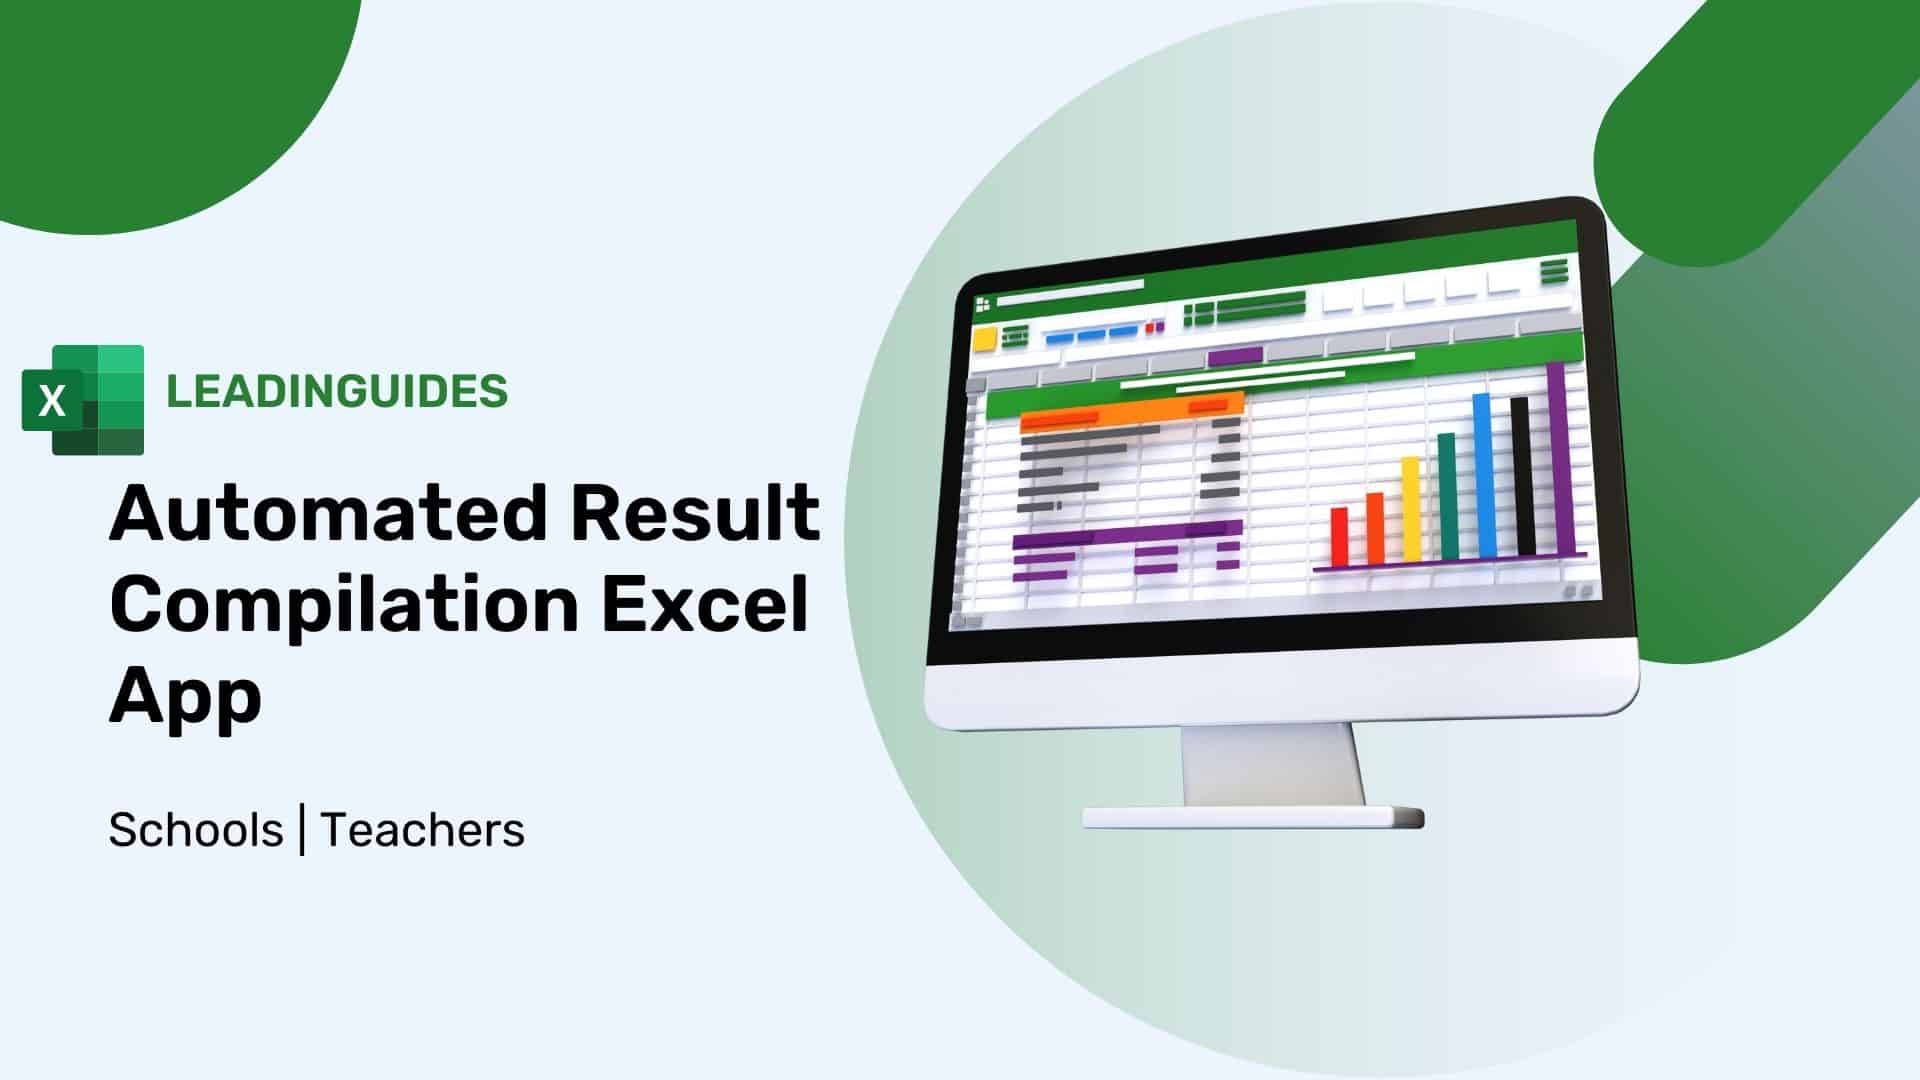 Automated Result Compilation Excel App